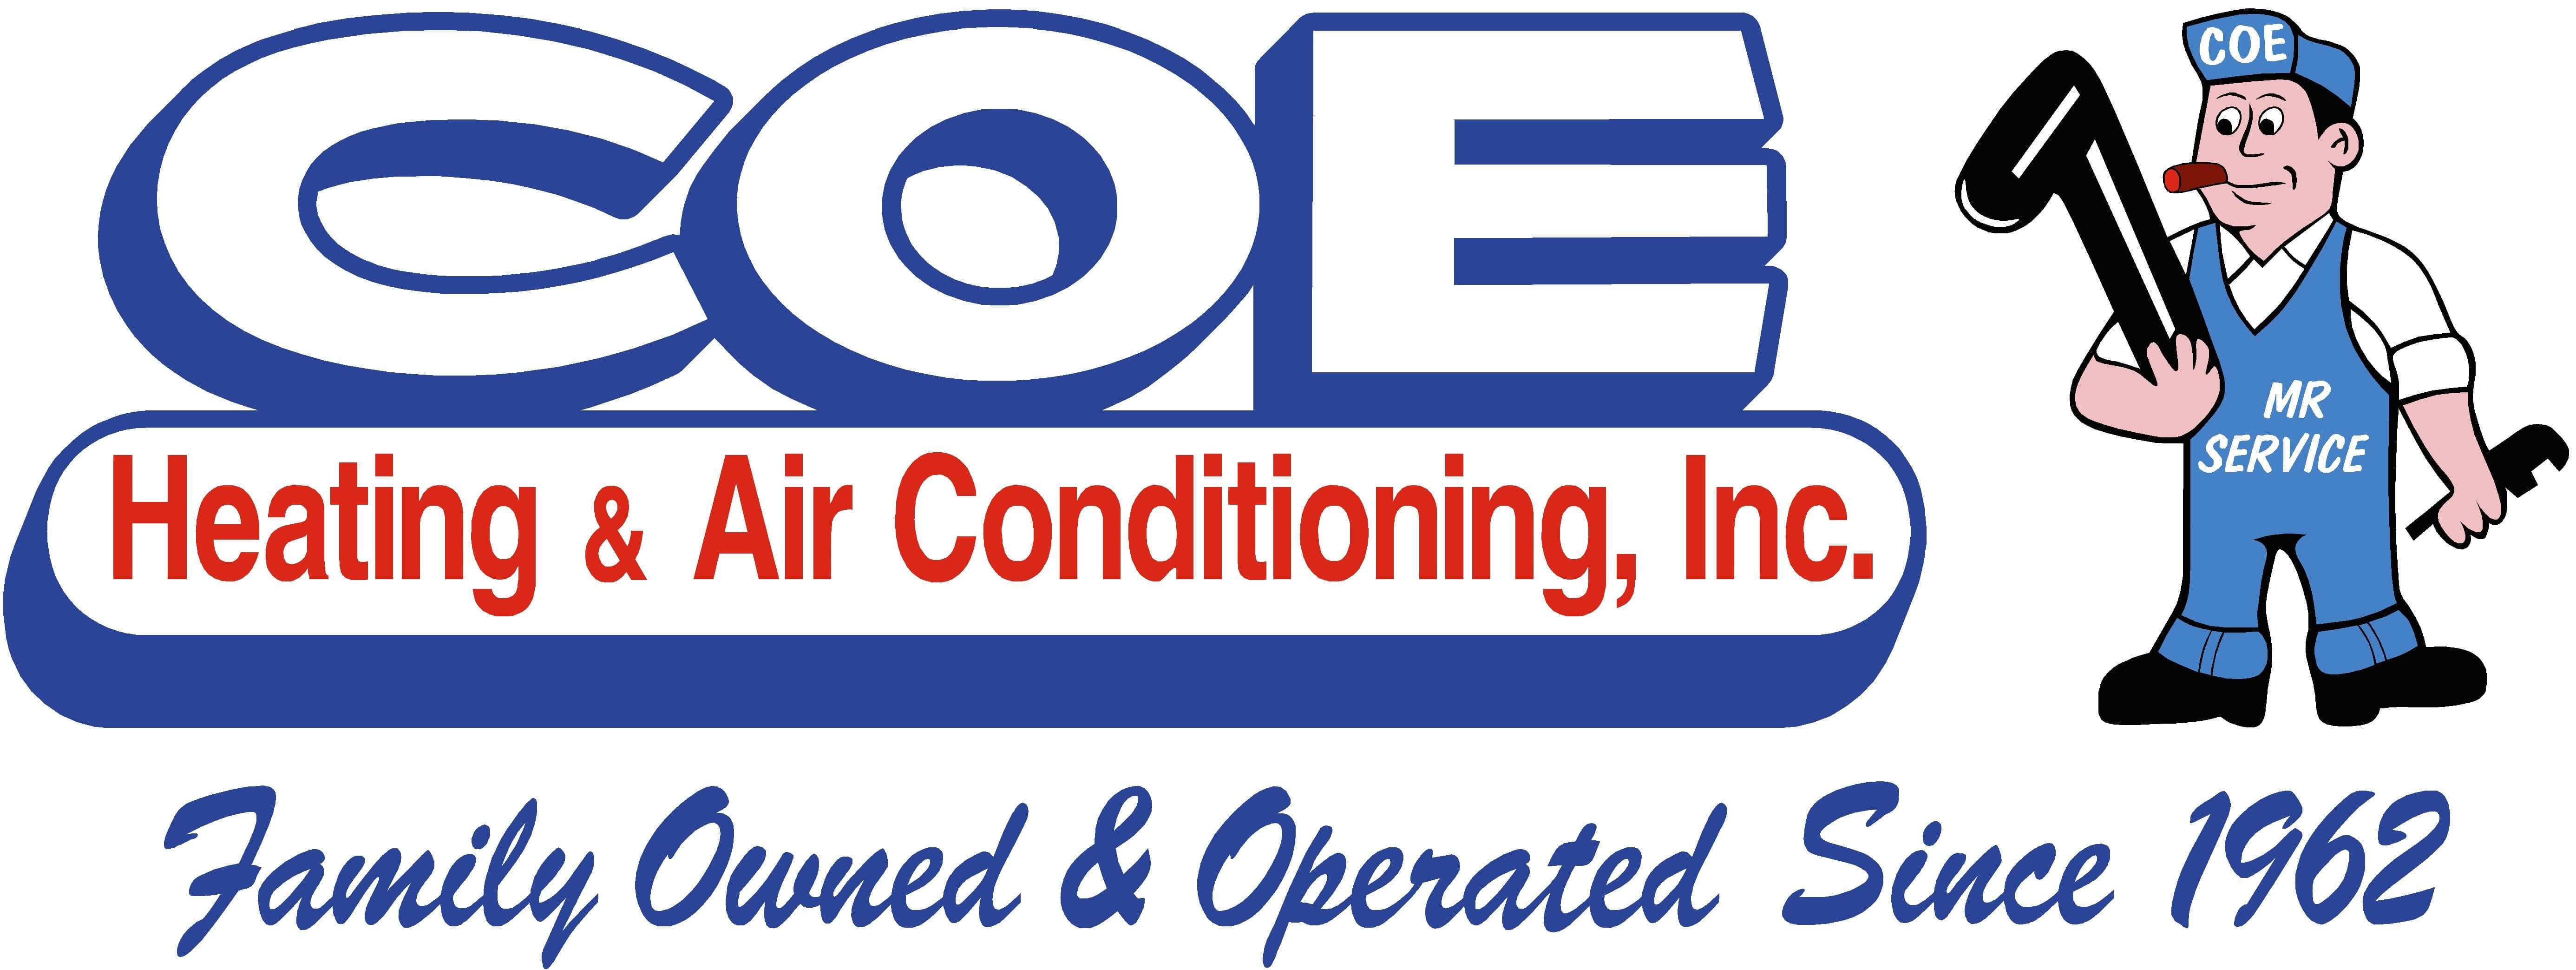 Coe Heating & Air Conditioning Inc